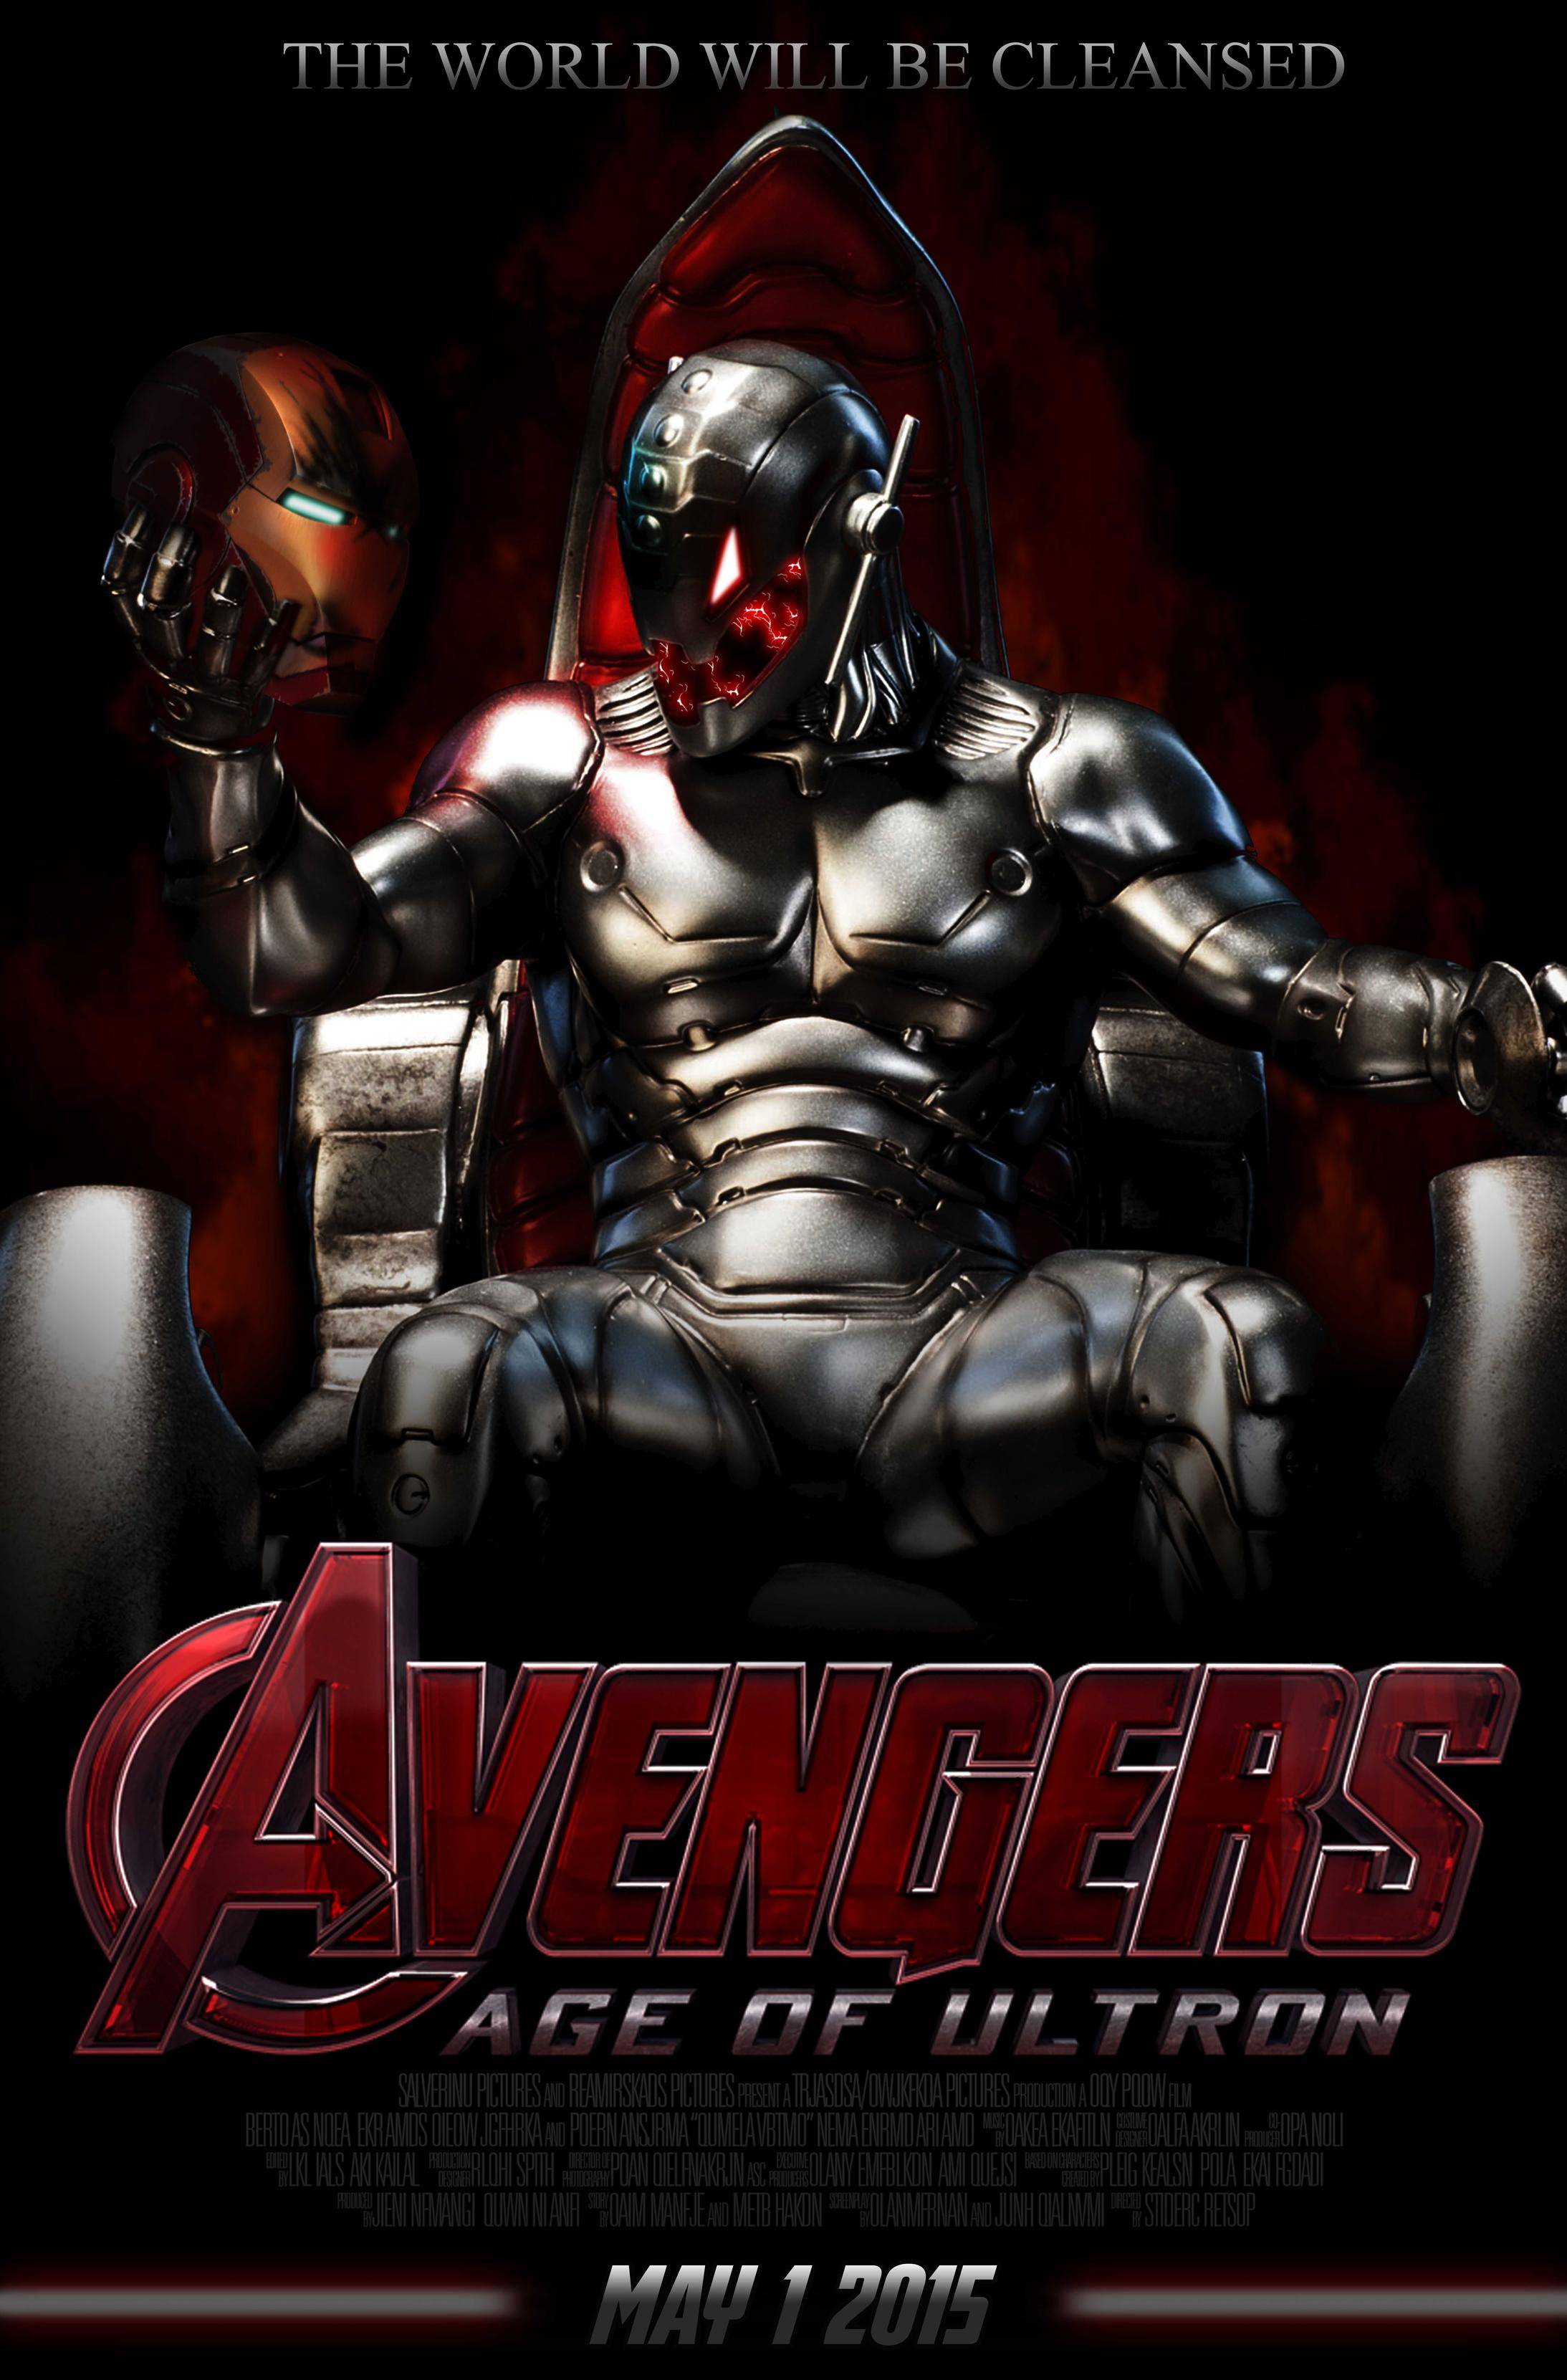 The Avengers: Age Of Ultron Wallpaper - Free Android Application ...